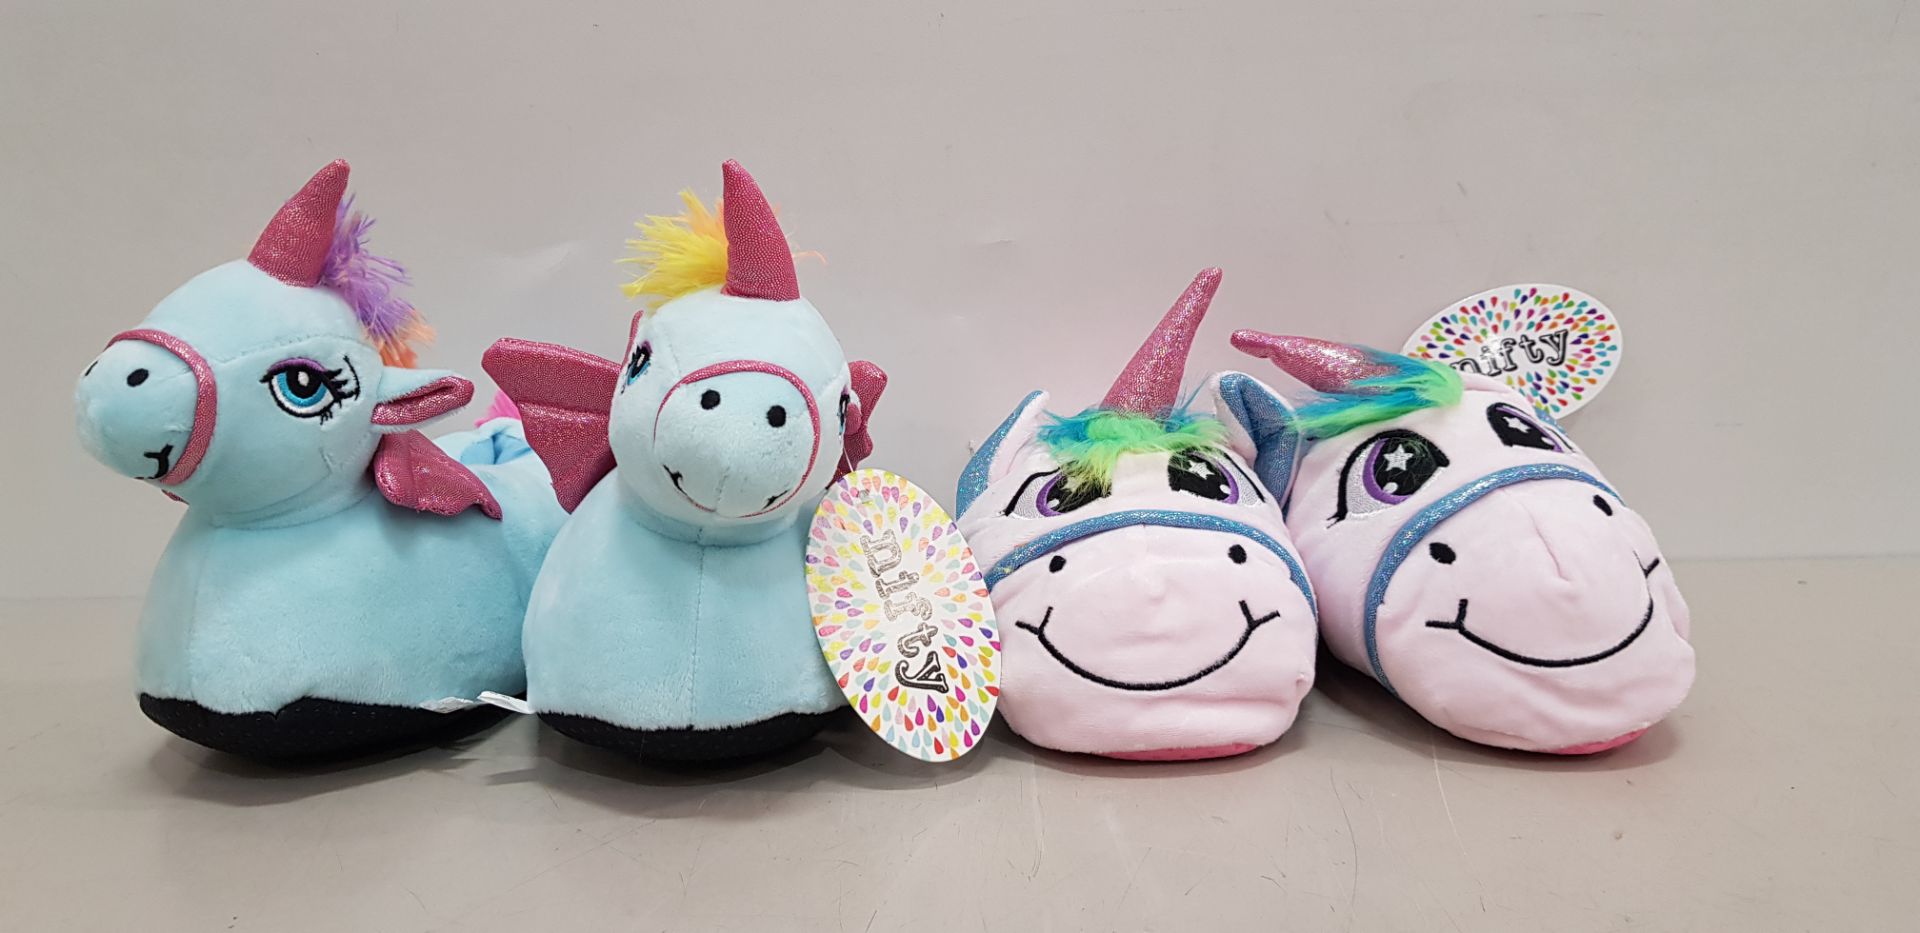 30 X BRAND NEW NIFTY KIDS UNICORN 3D SLIPPERS - IN WHITE AND BLUE - IN MIXED SIZES TO INCLUDE KIDS